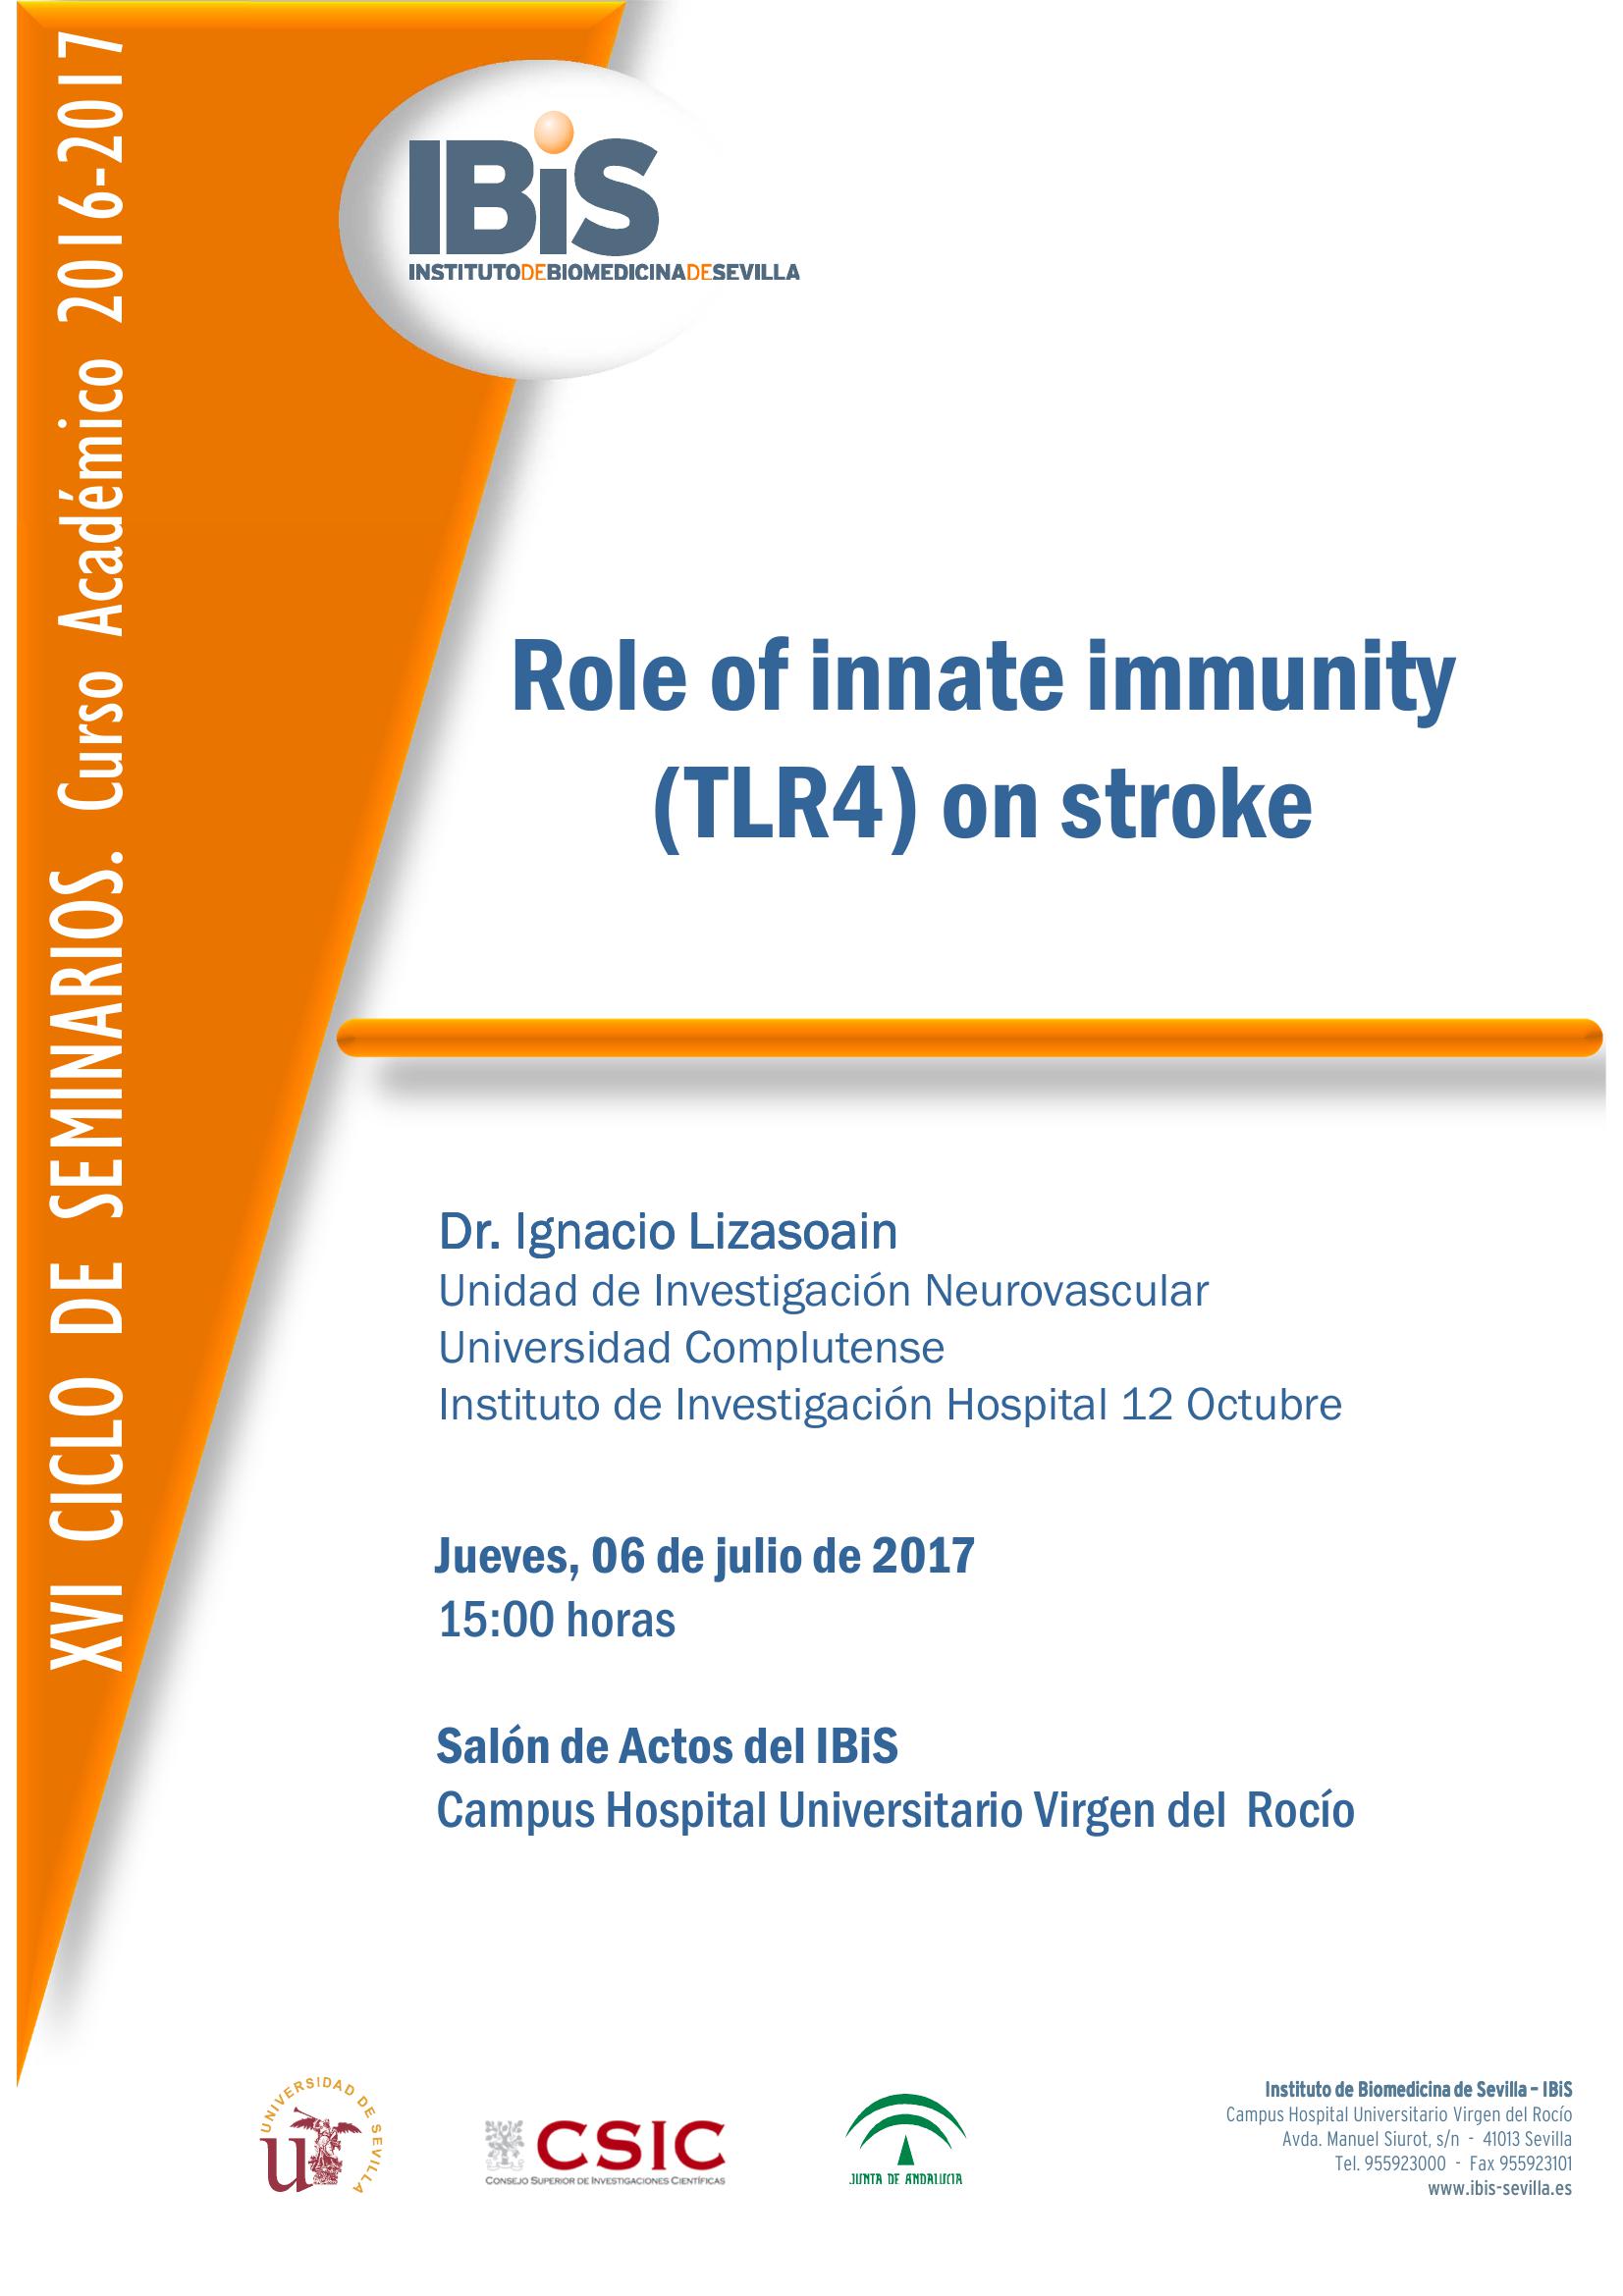 Poster: Role of innate immunity (TLR4) on stroke